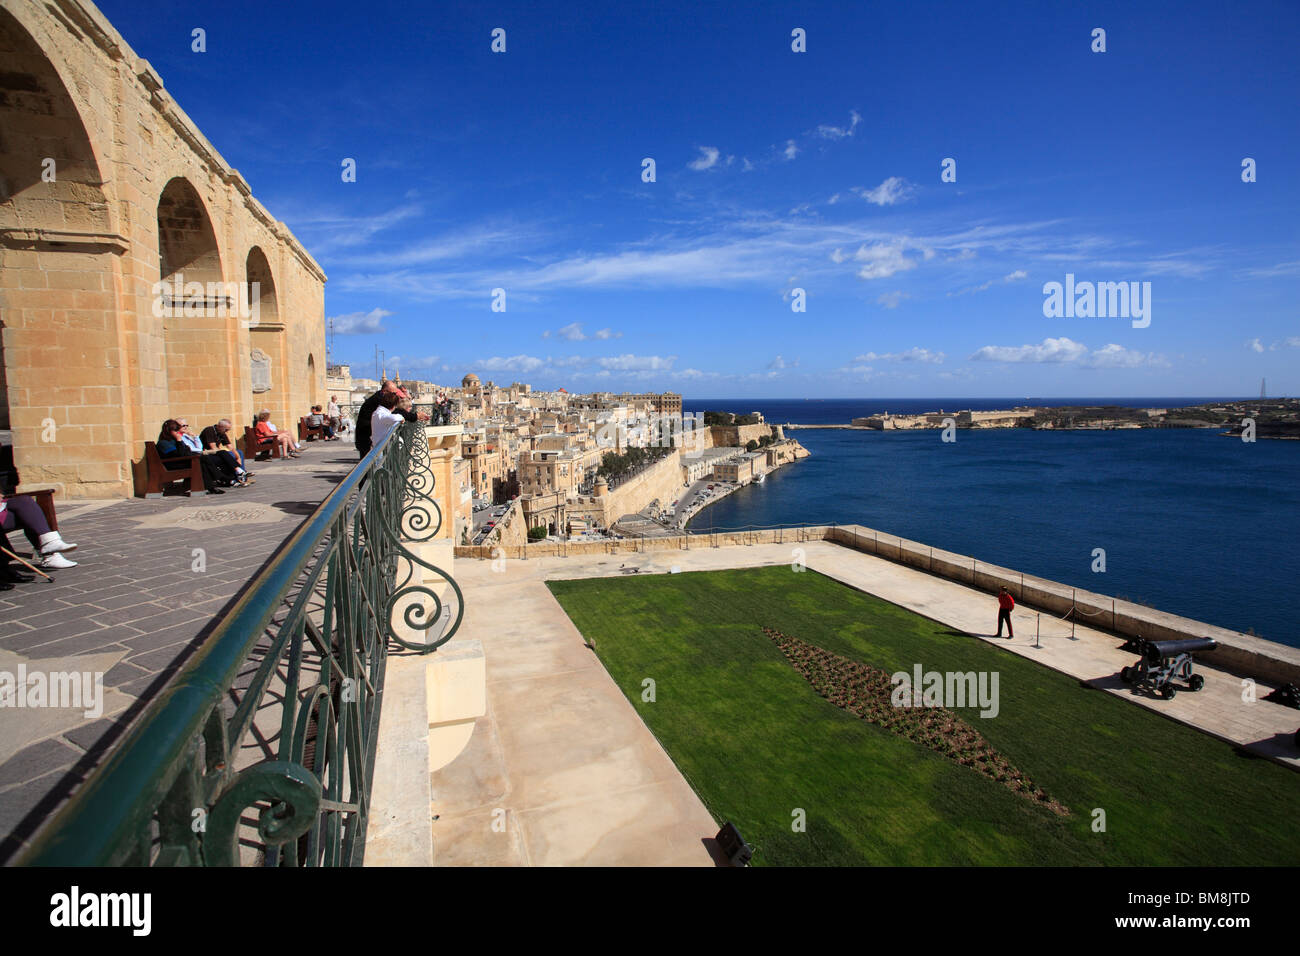 A view of the Grand Harbour from the Upper Barracca Gardens with the Saluting Battery Stock Photo